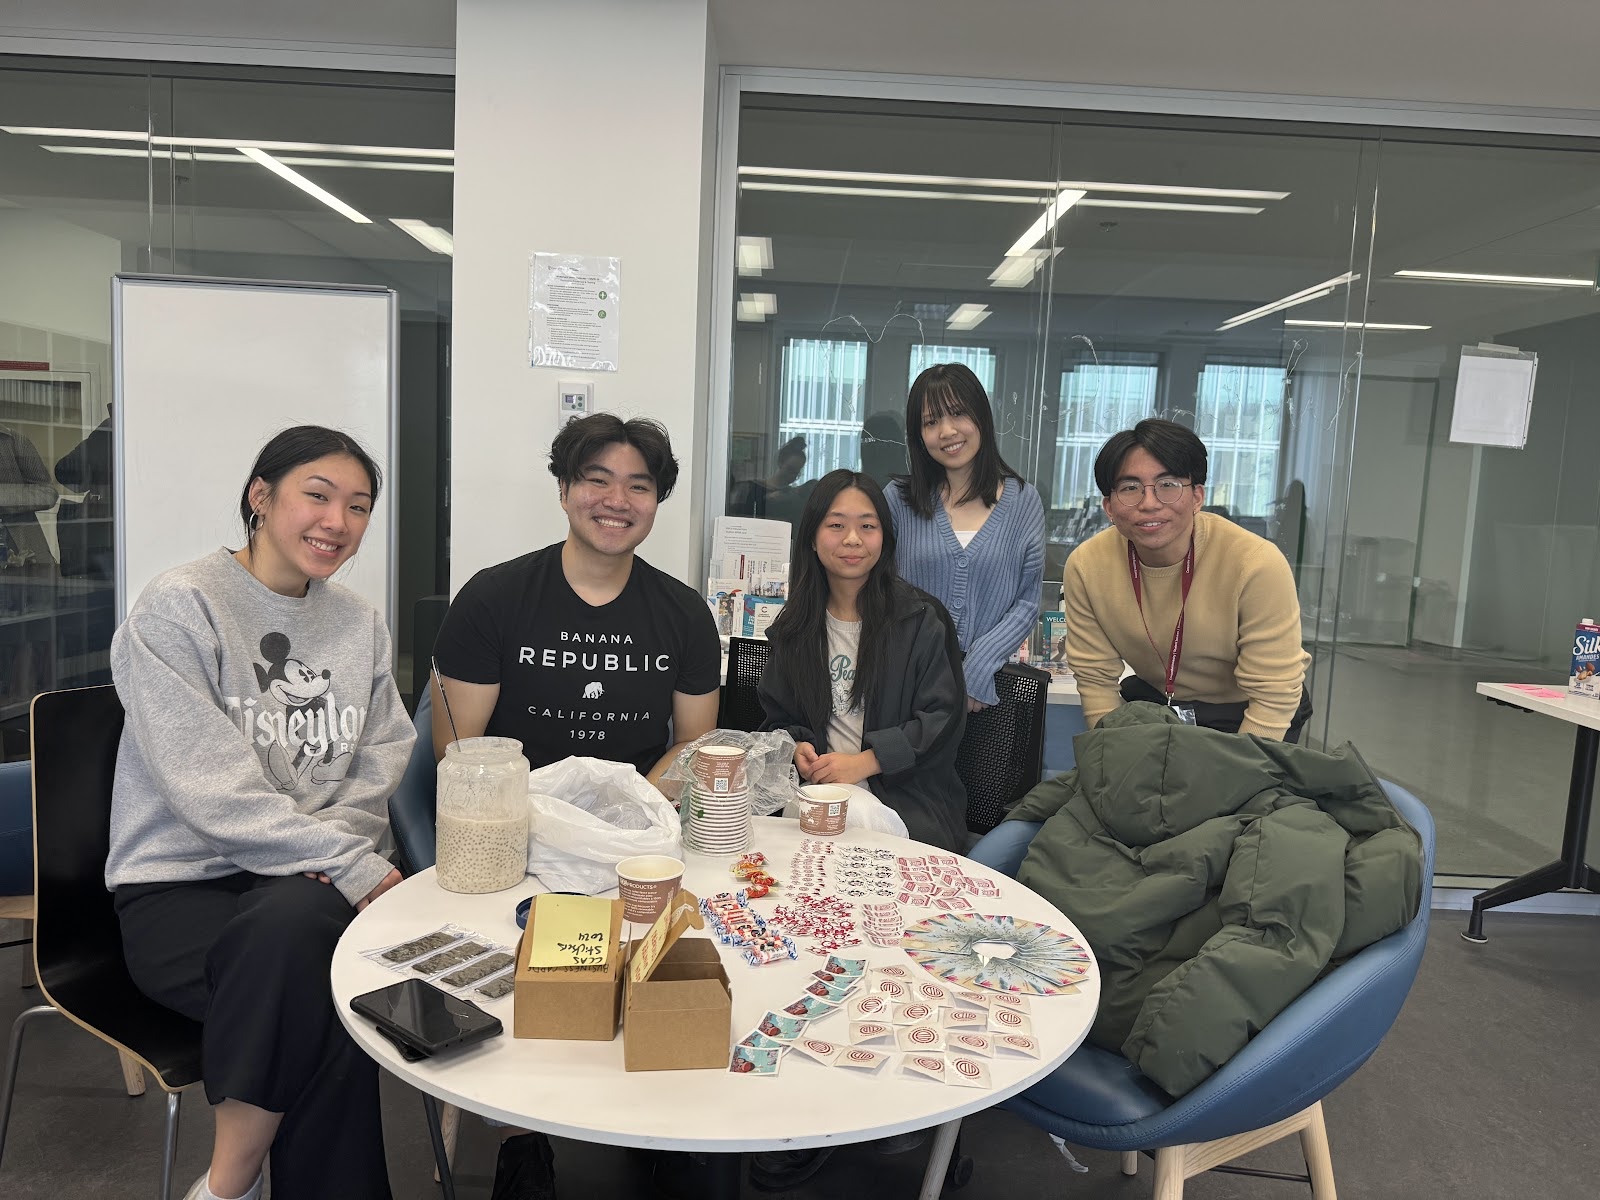 Five Asian students sit and stand around a white table. A large container of sago dessert soup (which is white, with small clear coloured pearls) is on the table along with many colourful stickers and candies.